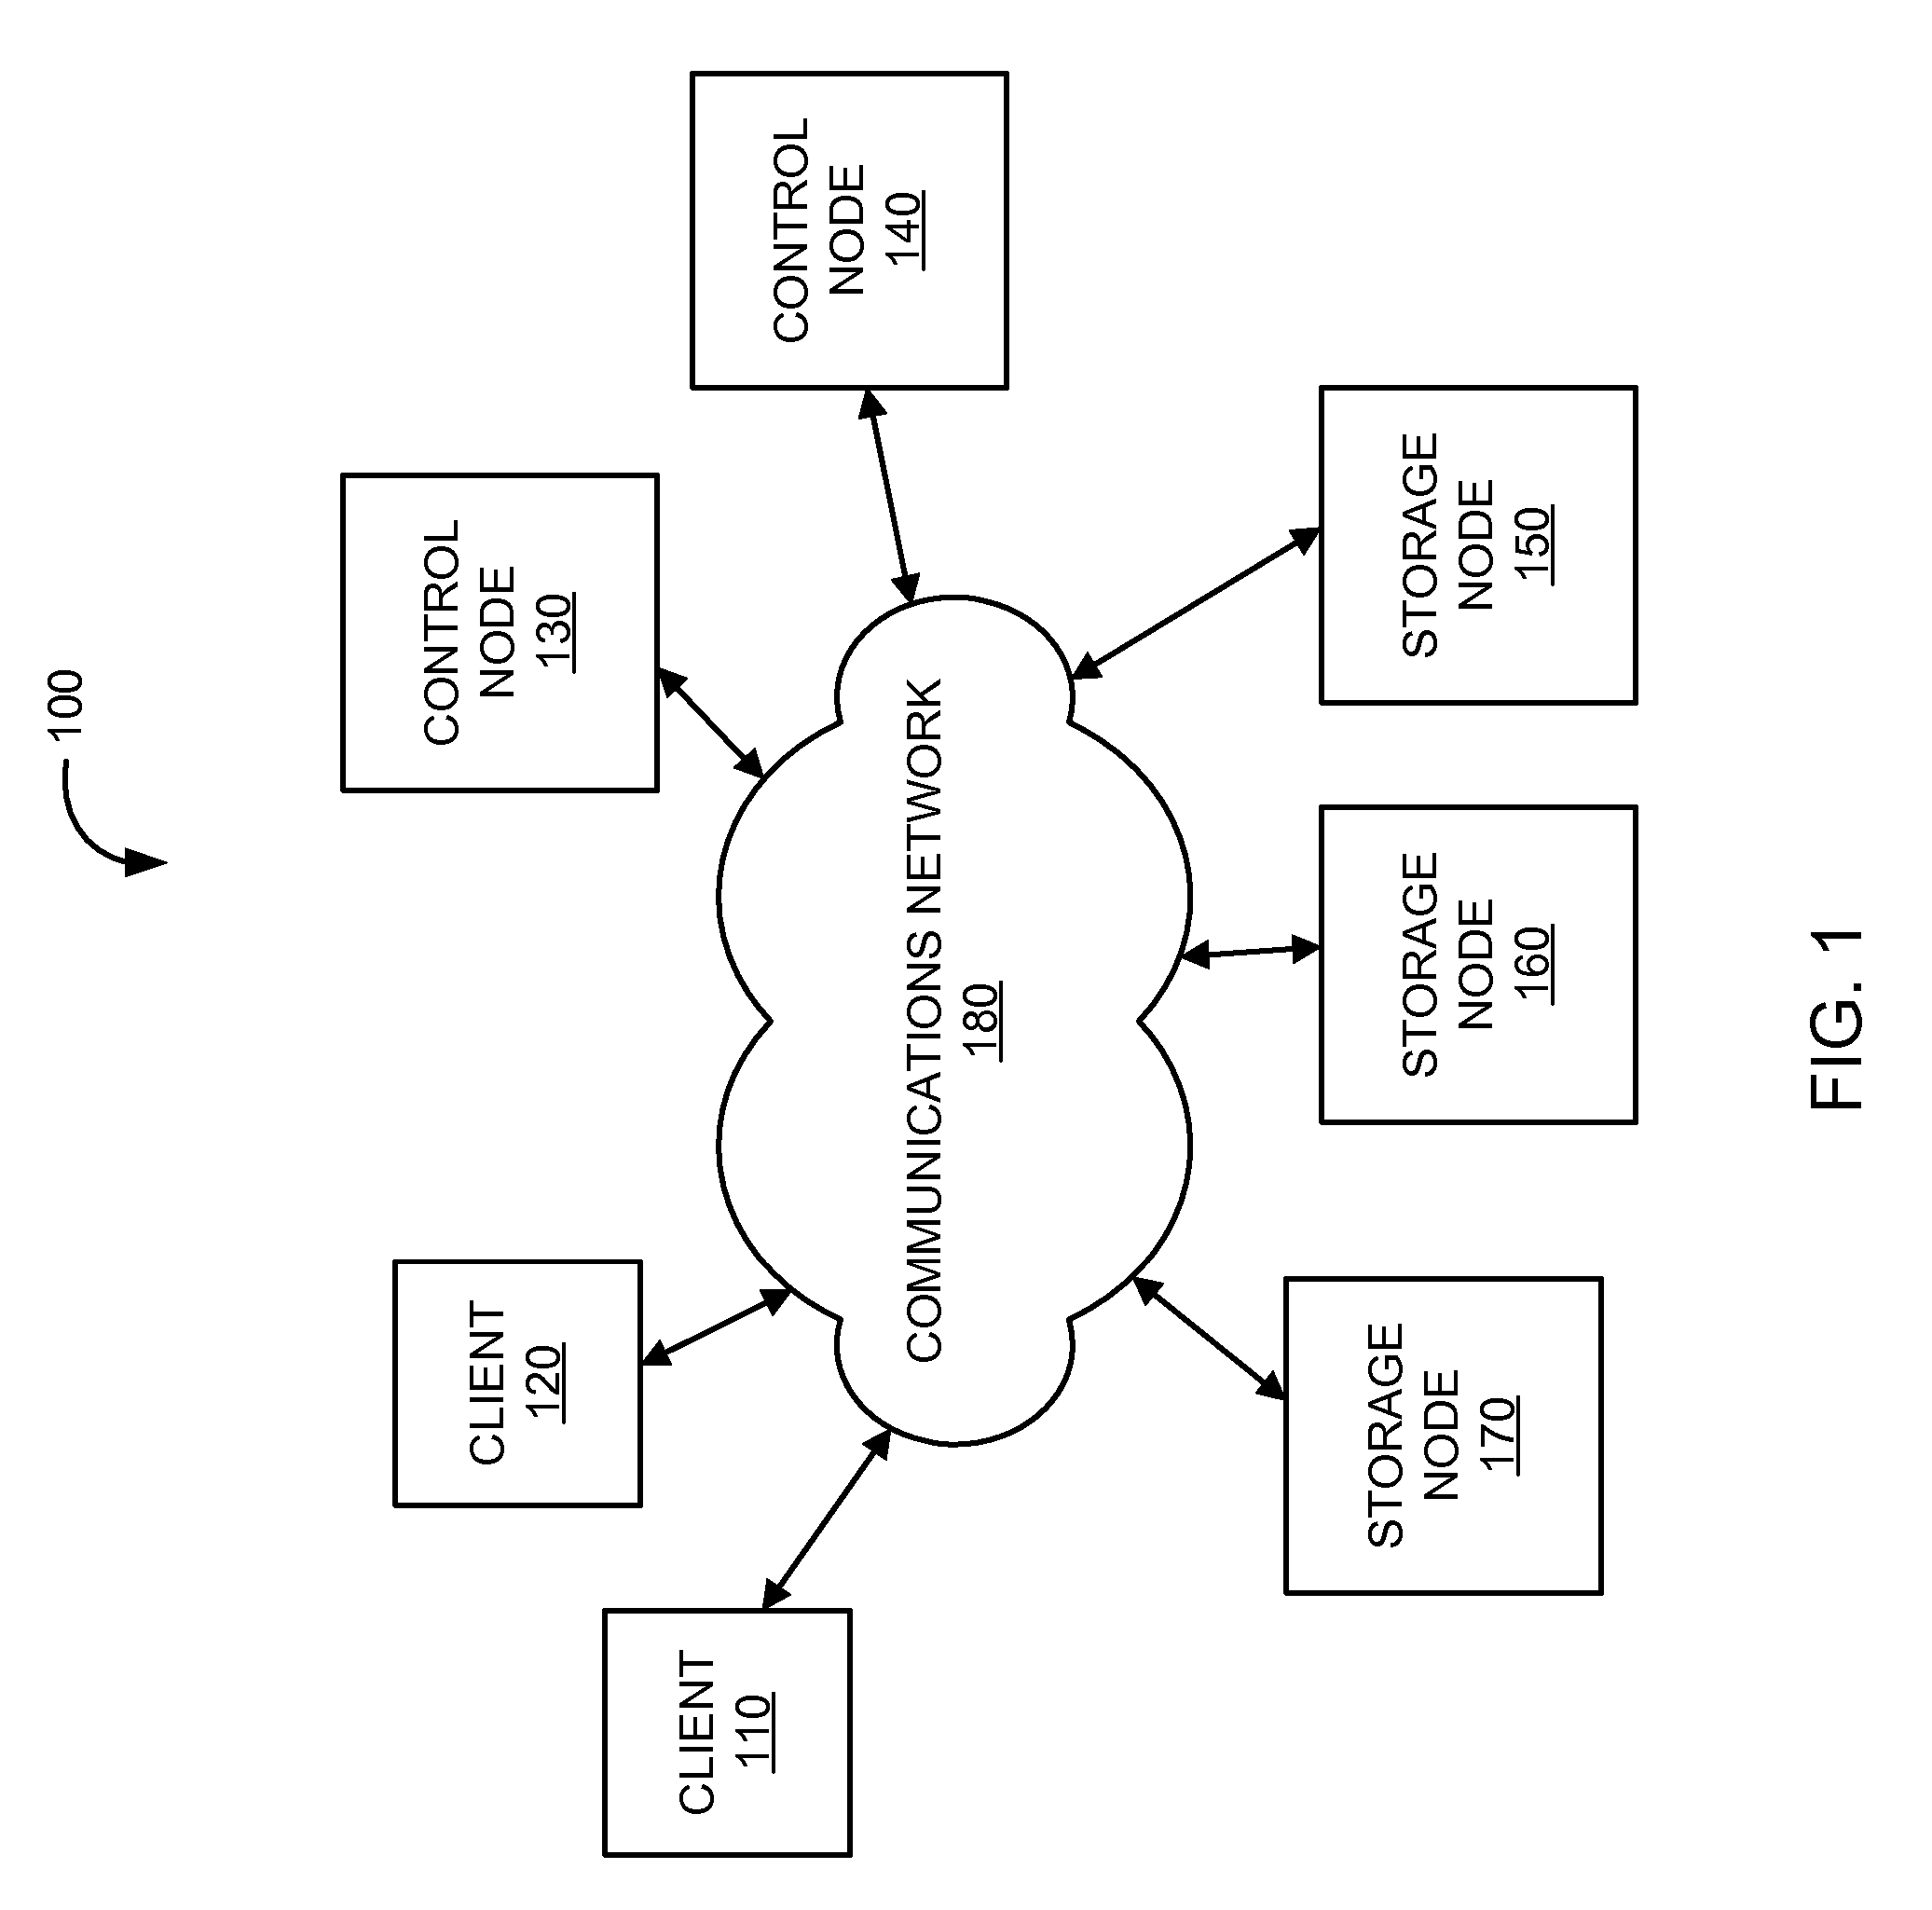 Asynchronous file replication and migration in a storage network